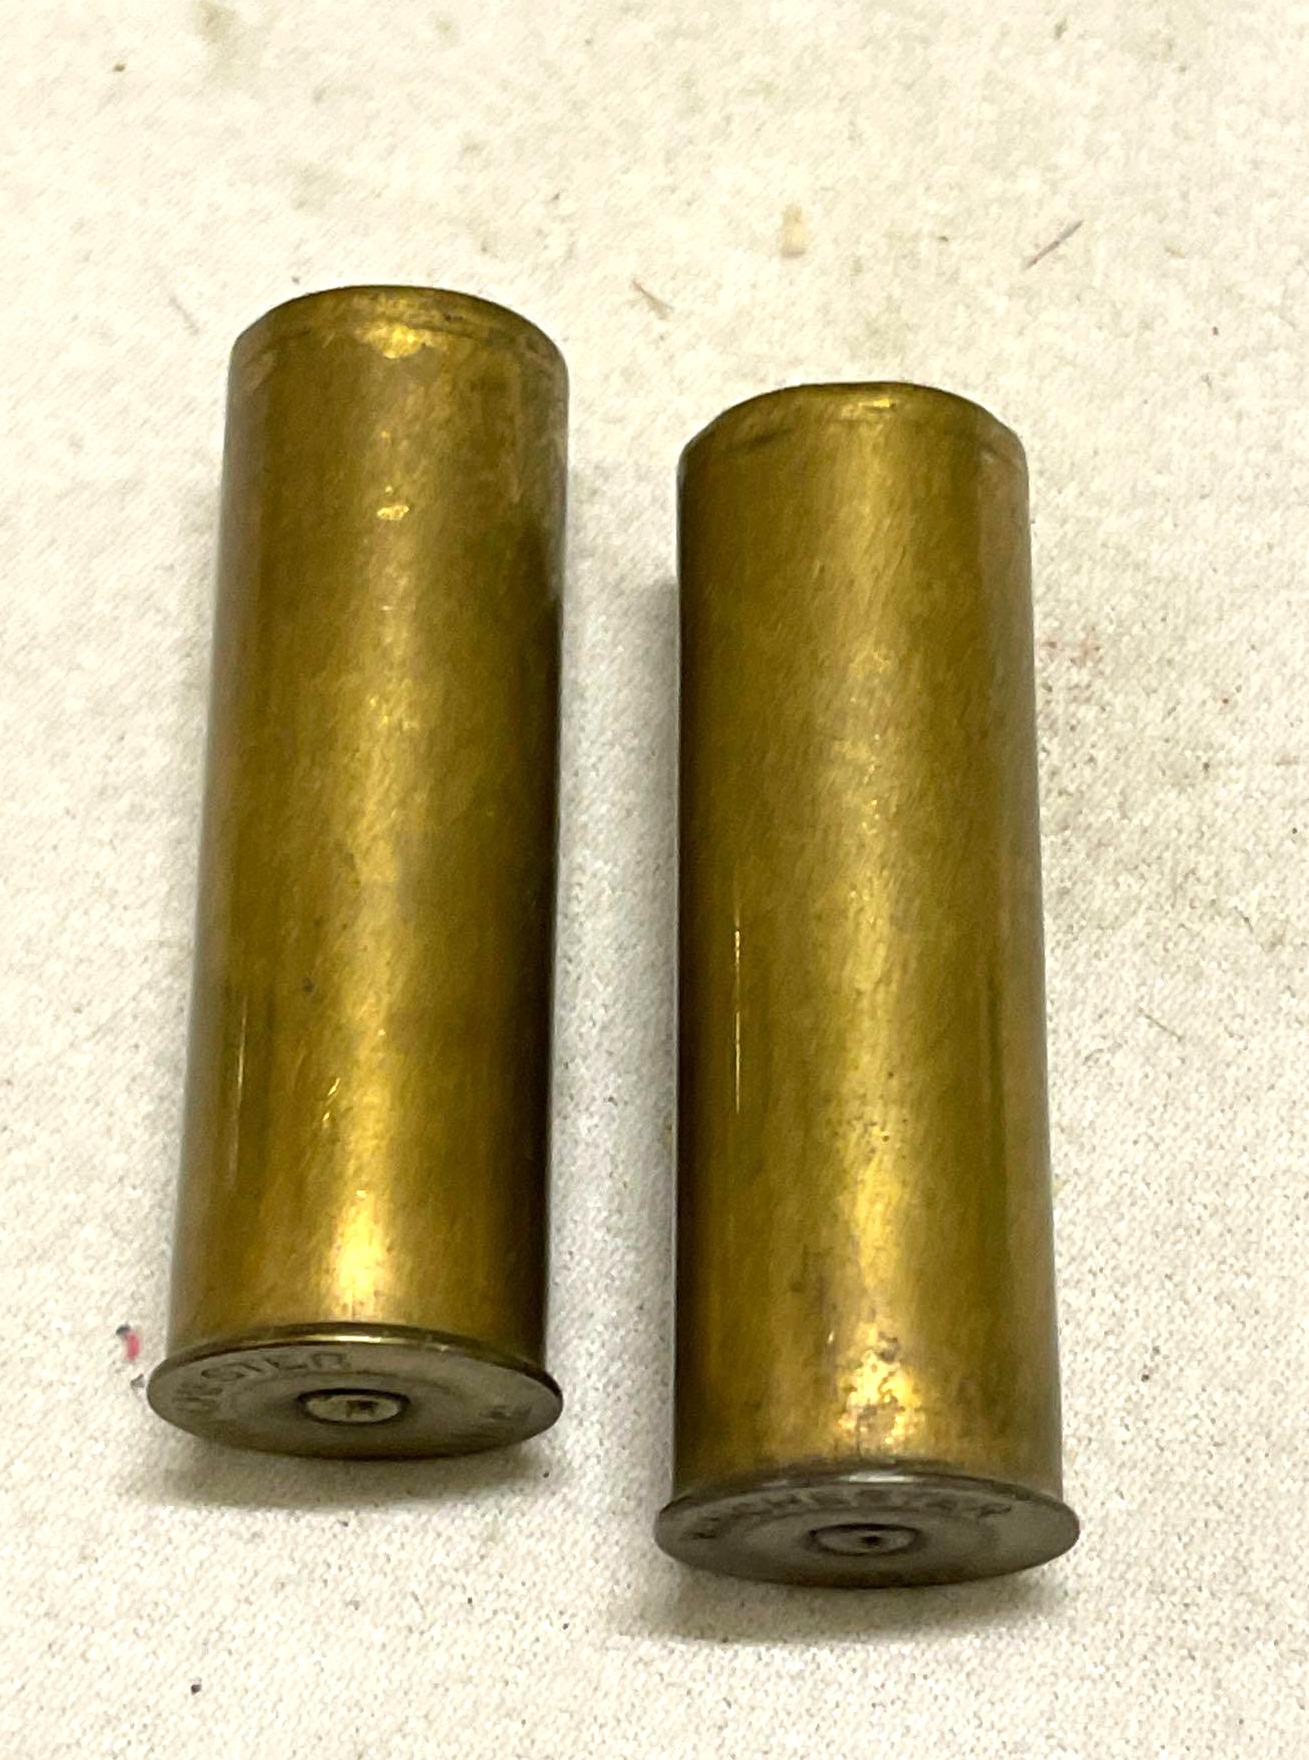 What was the point of brass shotgun shells, and are they still